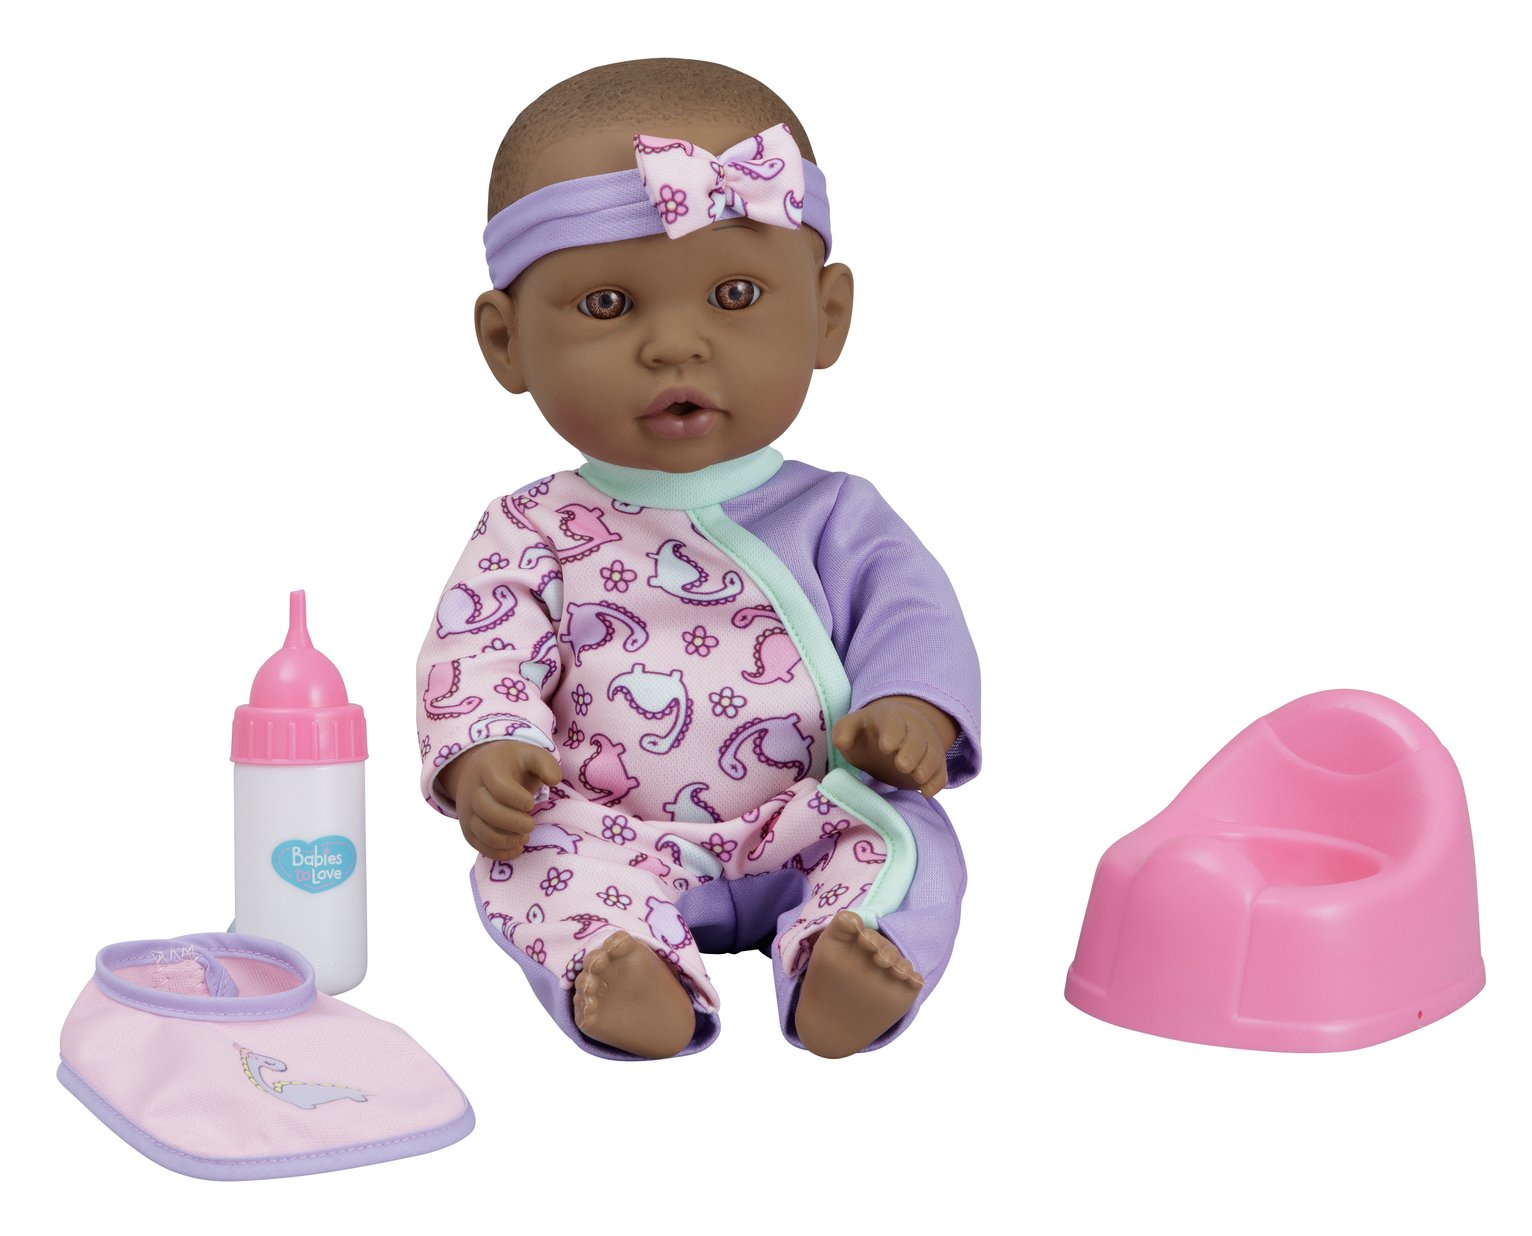 Chad Valley Babies to Love Drink and Wet Baby Maisie Doll Review